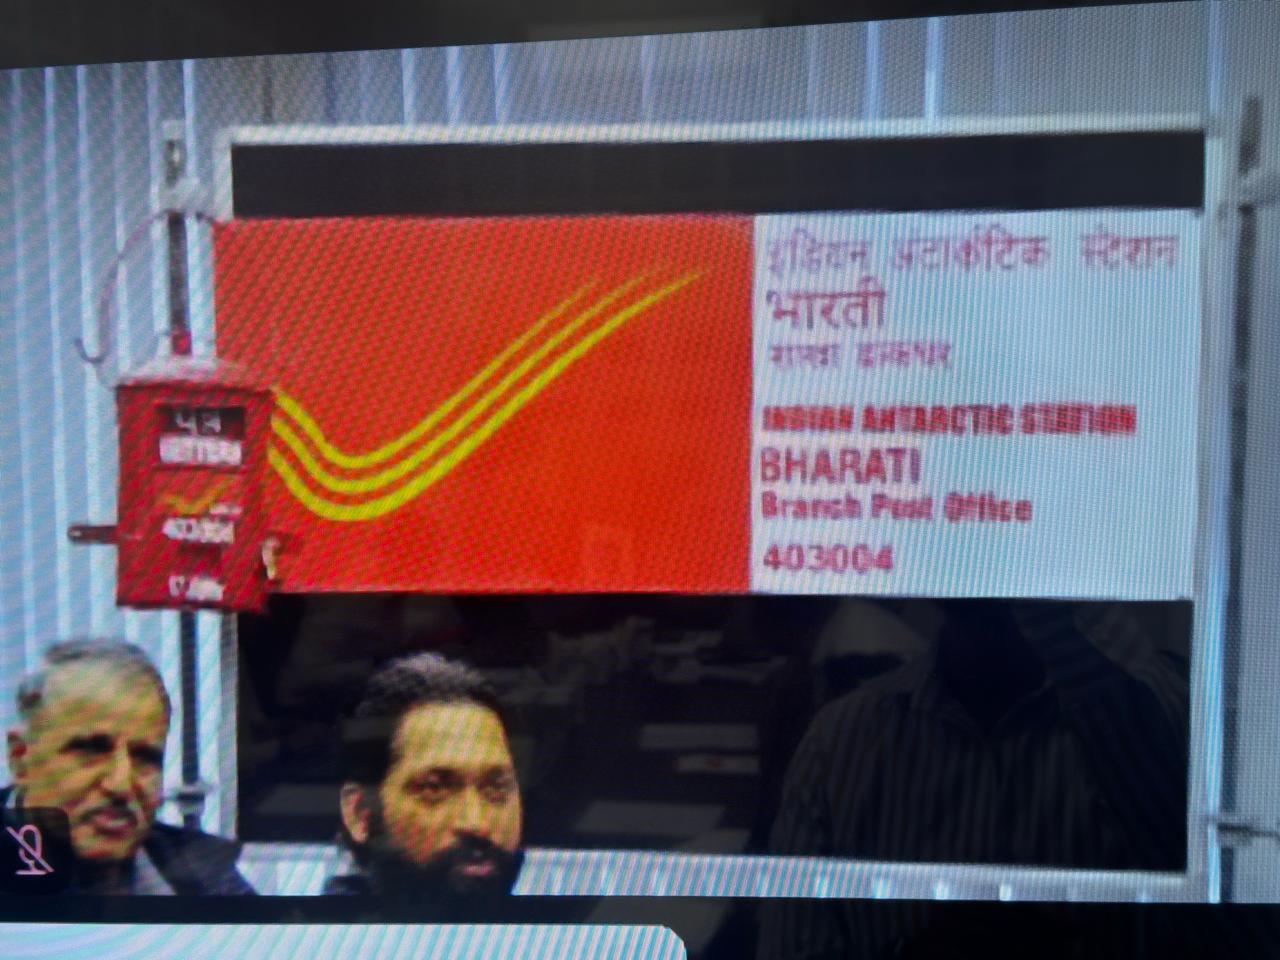 Opening of Bharati Branch Post Office at Bharati Station, Antarctica, via Web Link by Chief Postmaster General Maharashtra Circle on the 24th Foundation Day of NCPOR, Goa today